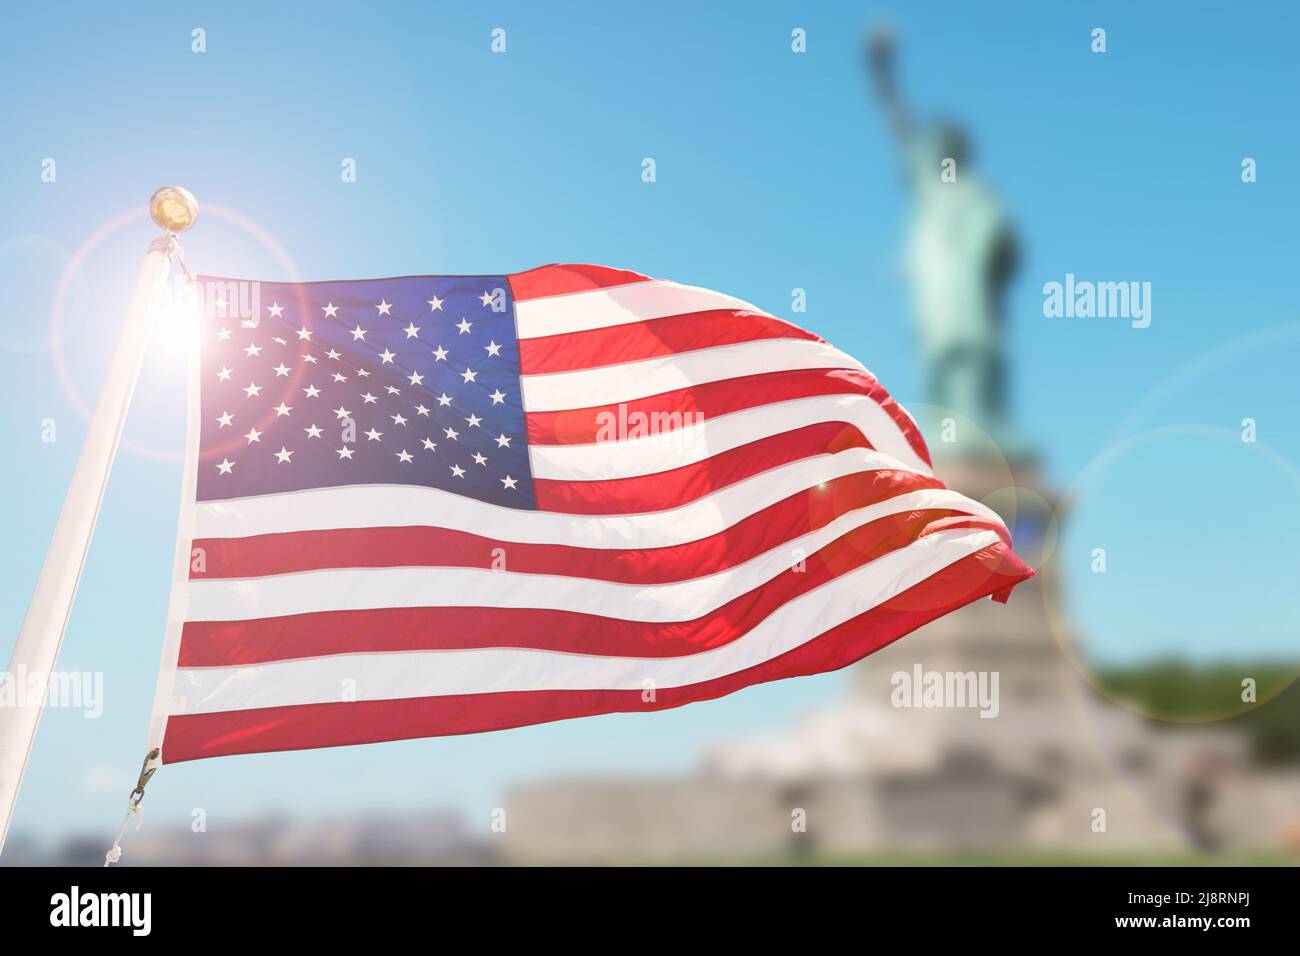 American flag on blurred statue of liberty background for Memorial Day, 4th of July, Labour Day, Presidents Day, Independence Day. Stock Photo